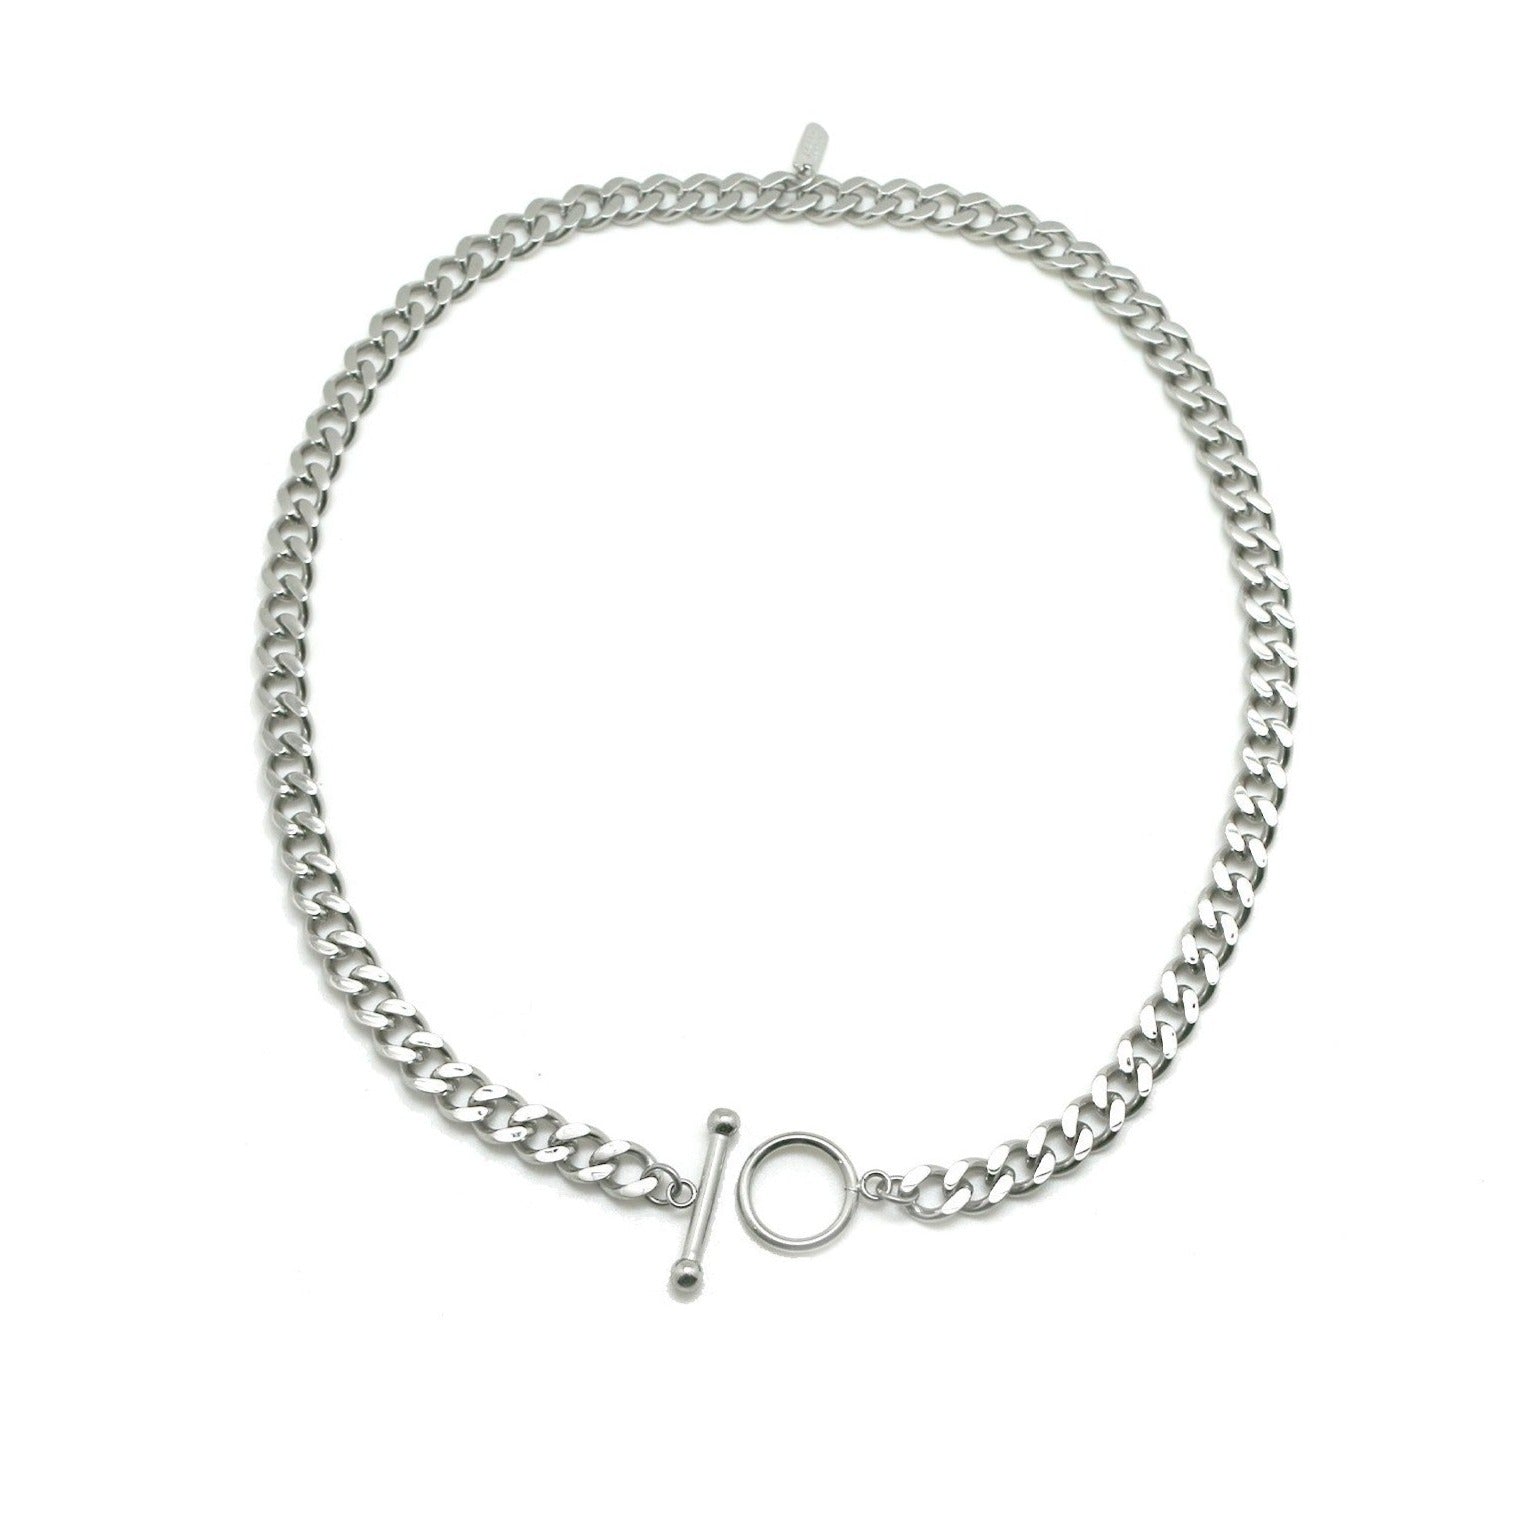 Silver T clasp necklace